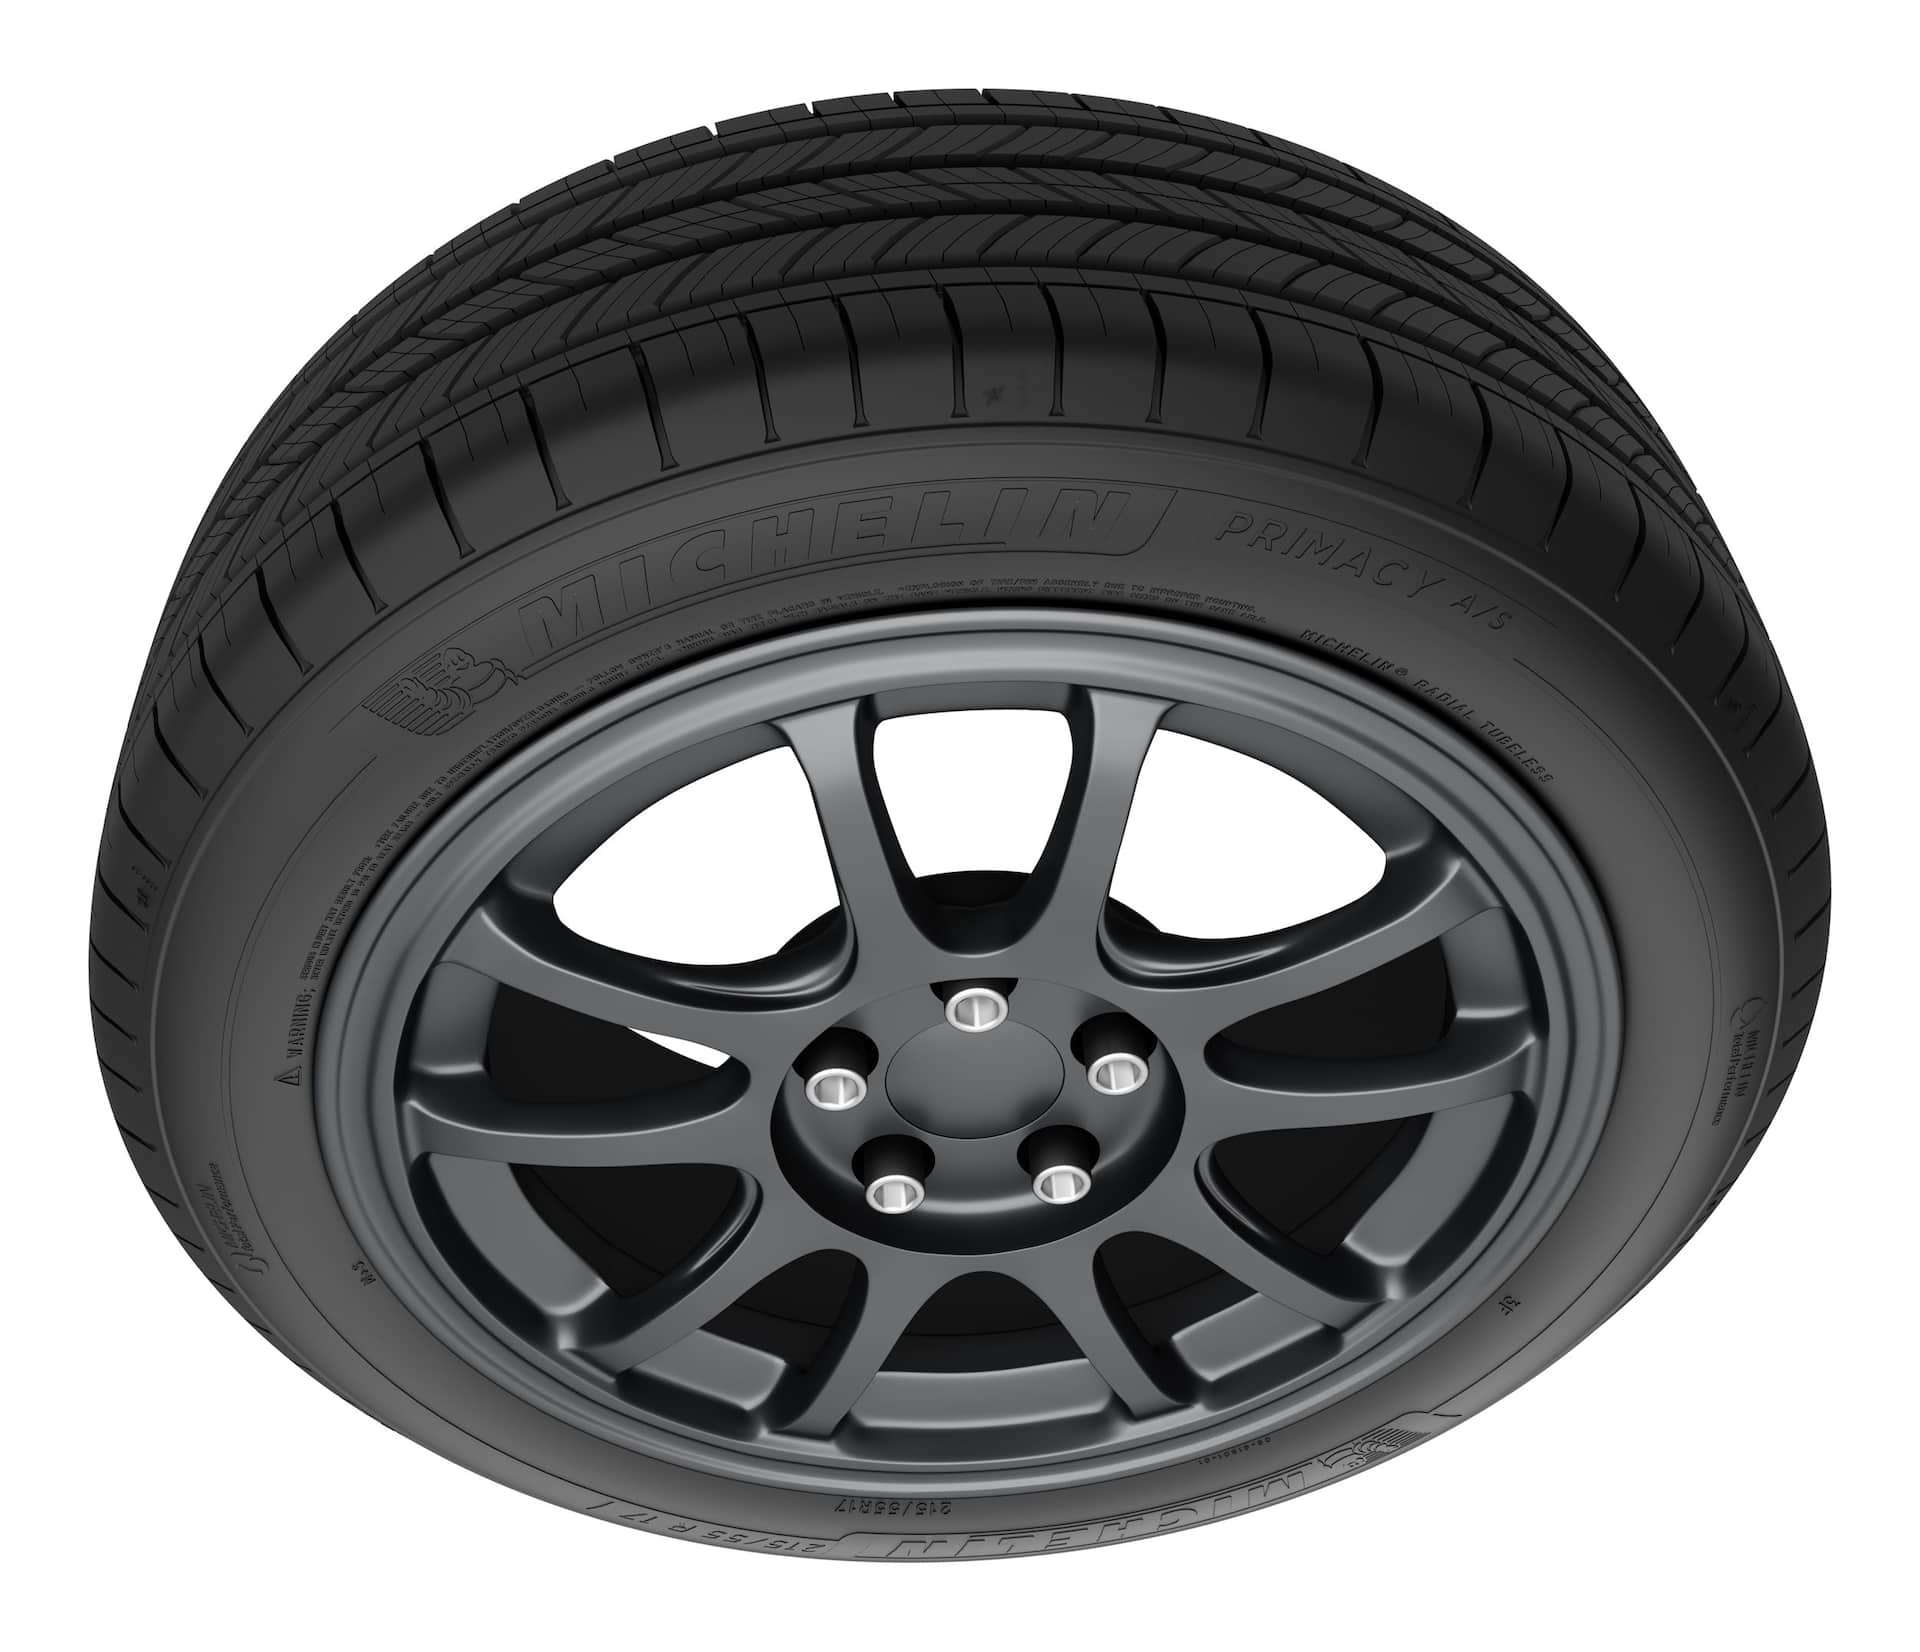 Michelin Primacy A/S Performance Tire For Passenger & CUV